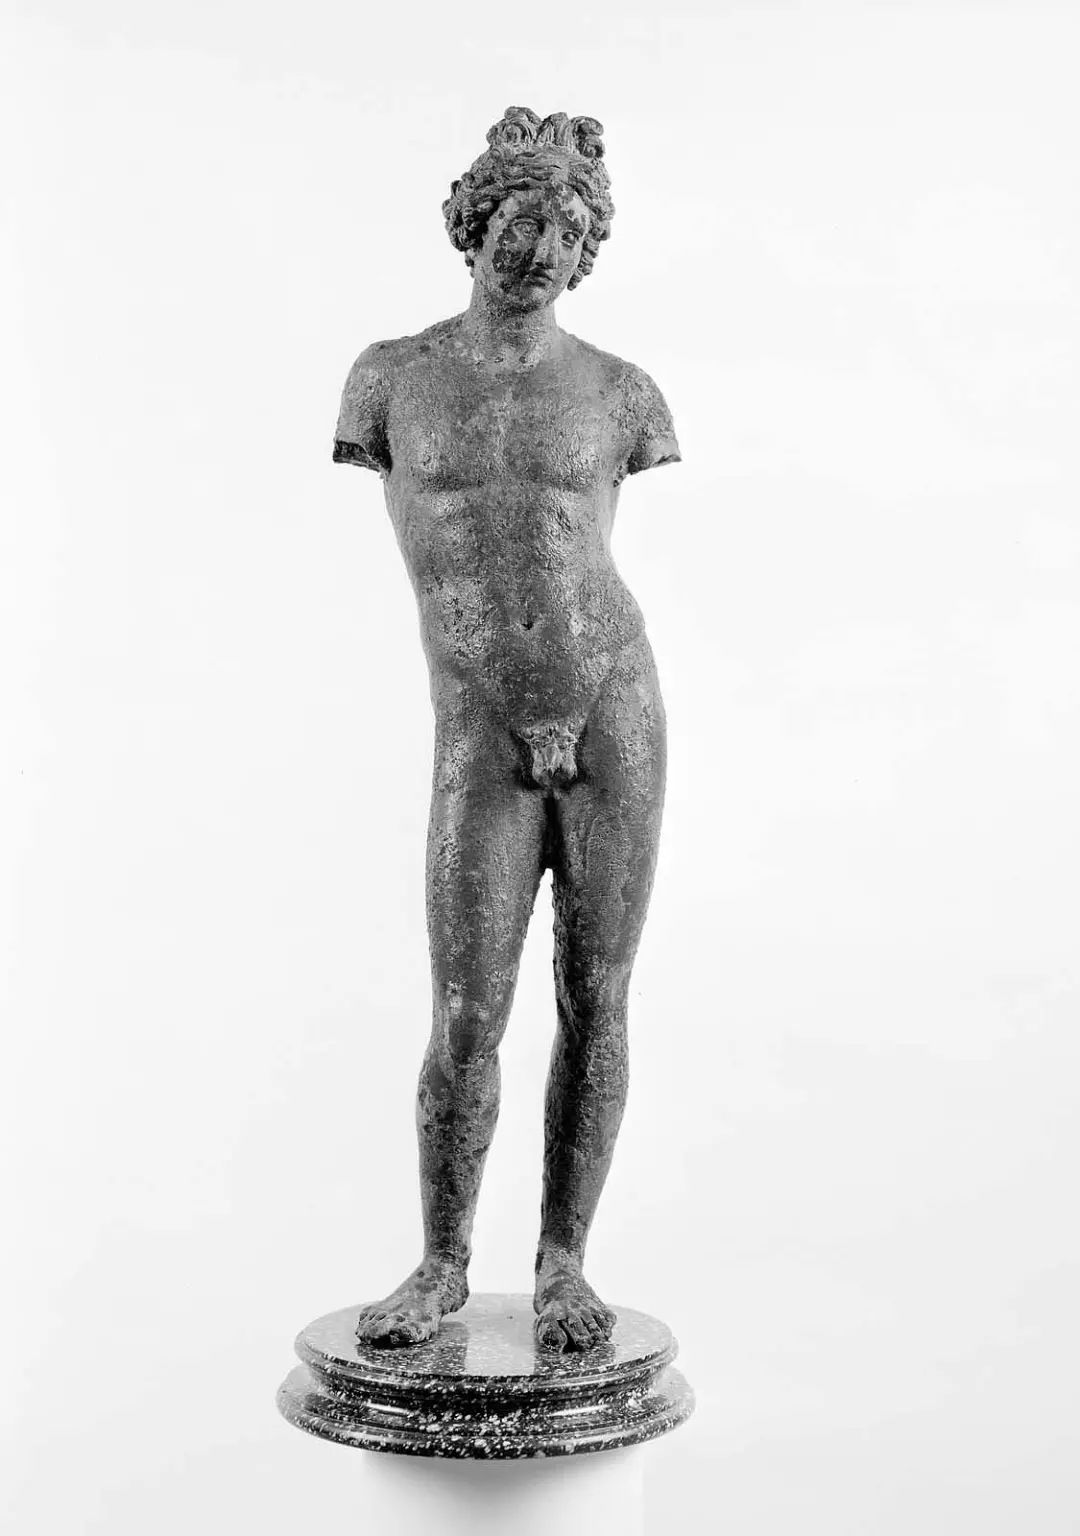 Statuette of Apollo, Roman, Imperial Period, 1st century B.C. or 1st century A.D. Bronze inlaid with silver